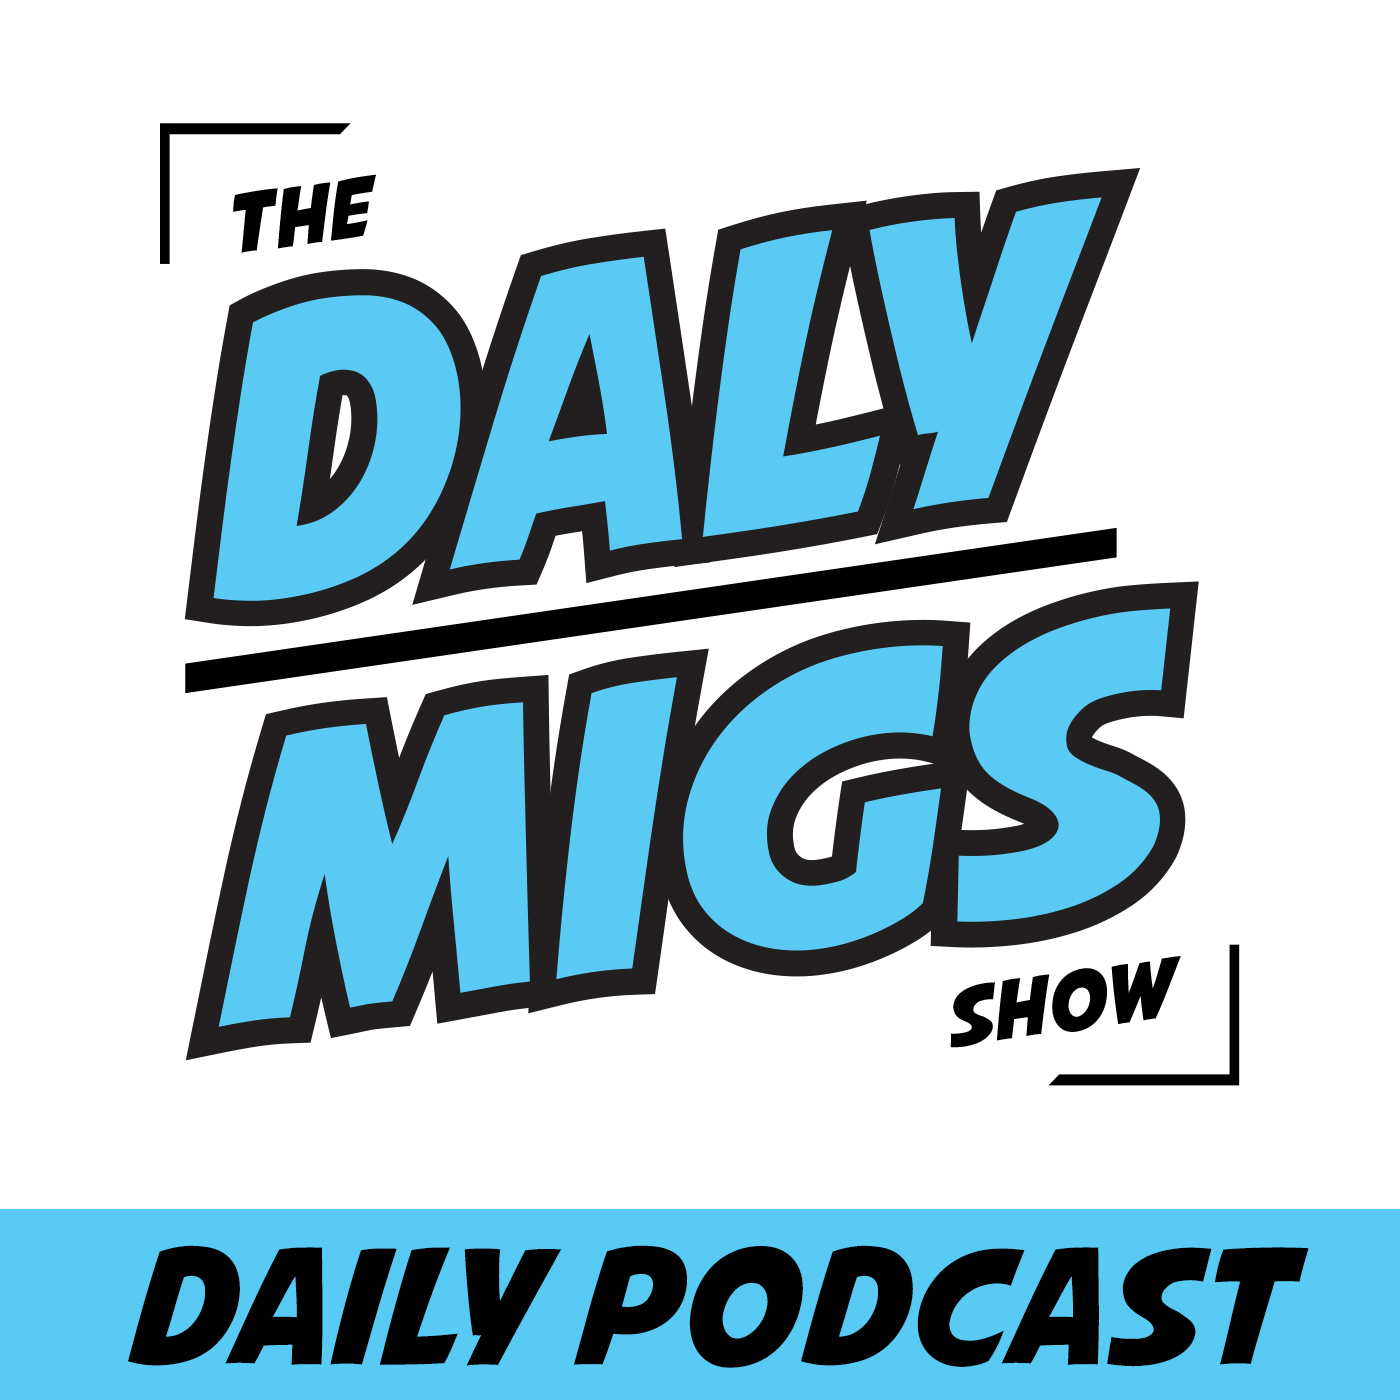 Daily Podcast pt. 4 - "Mother's Day: Danny's Mom"